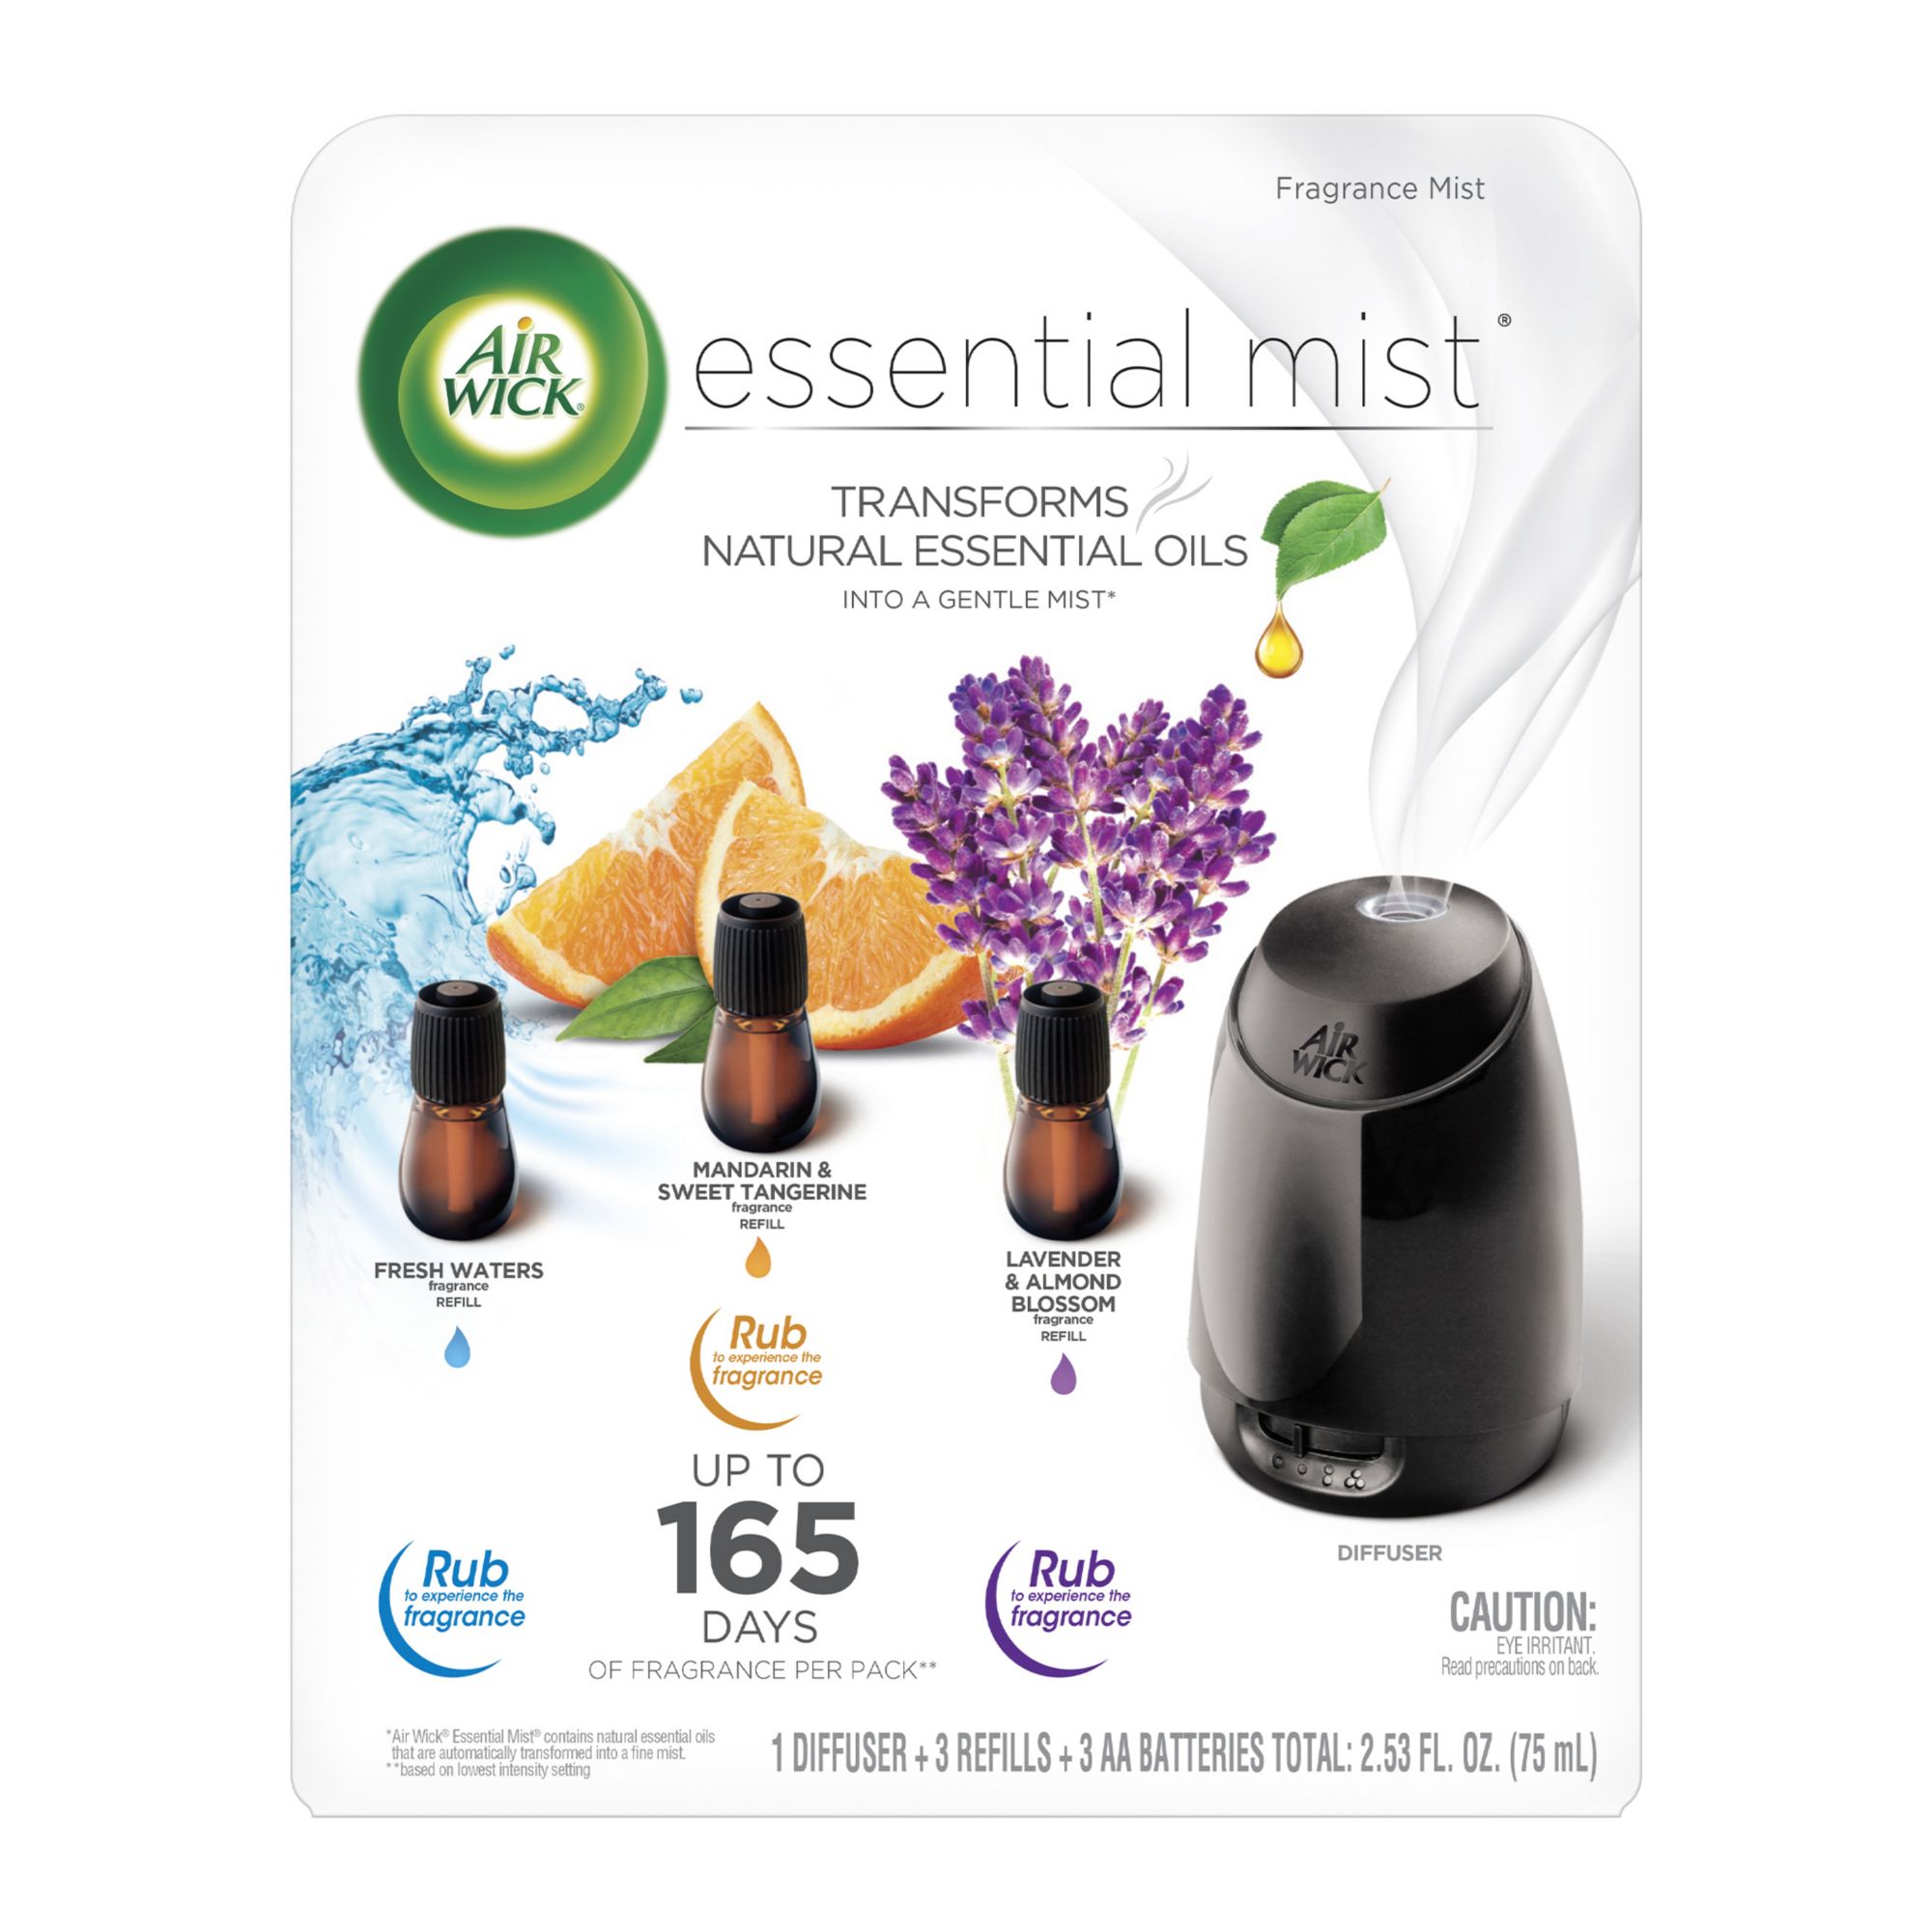 Air Wick Essential Mist Starter Kit (Diffuser + Refill), Lavender and  Almond Blossom, Essential Oils Diffuser, Air Freshener